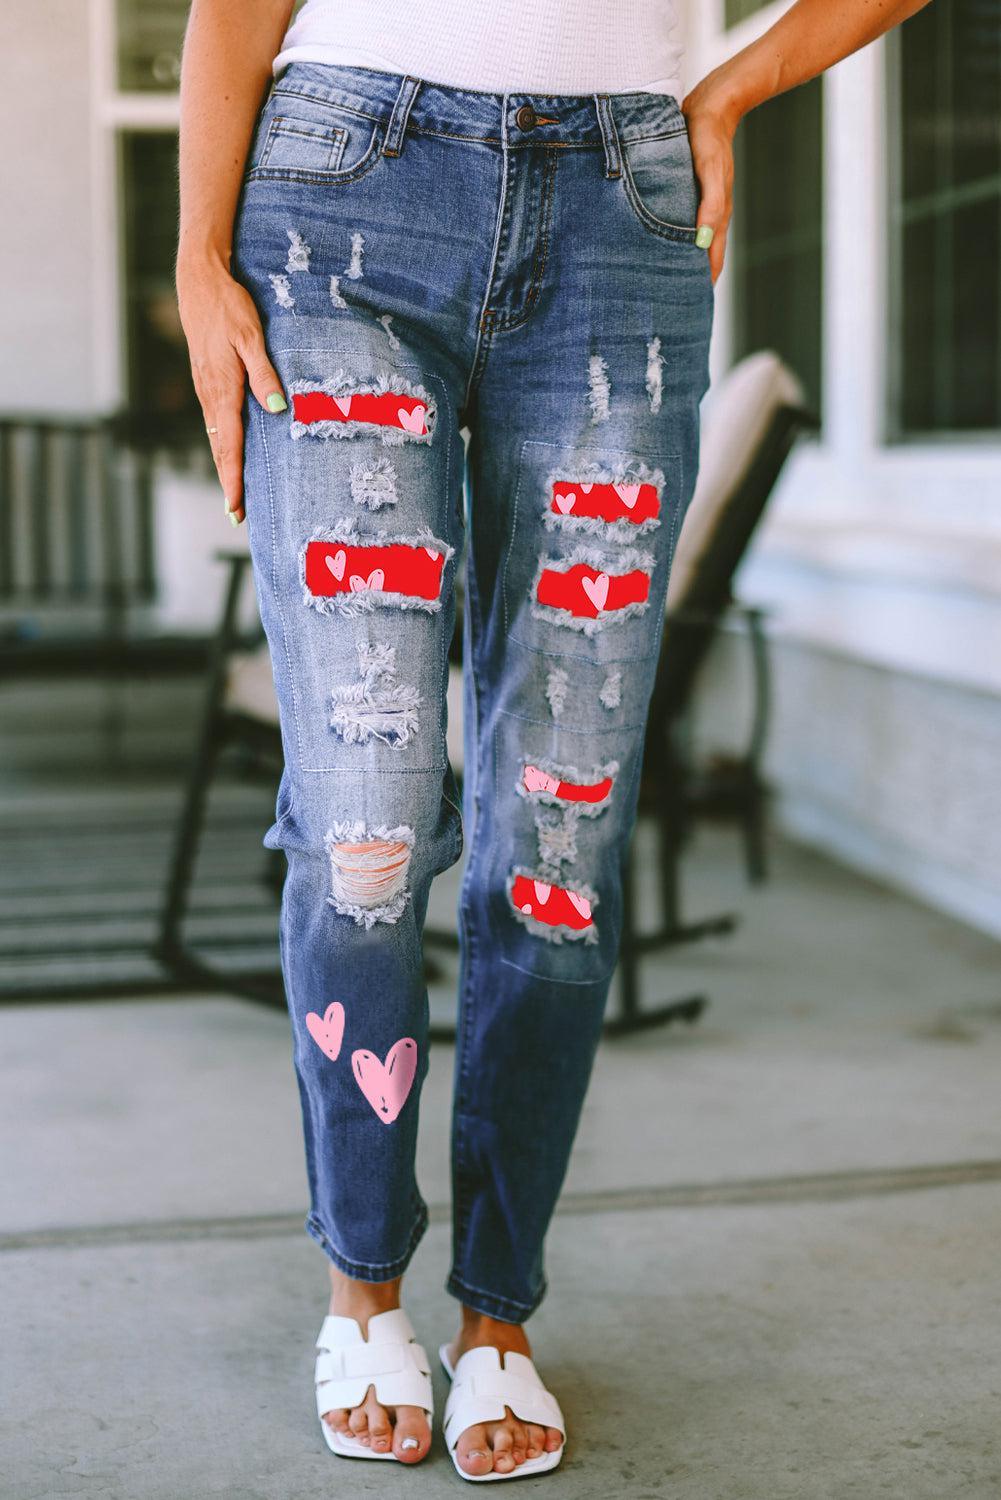 a woman wearing ripped jeans with hearts on them